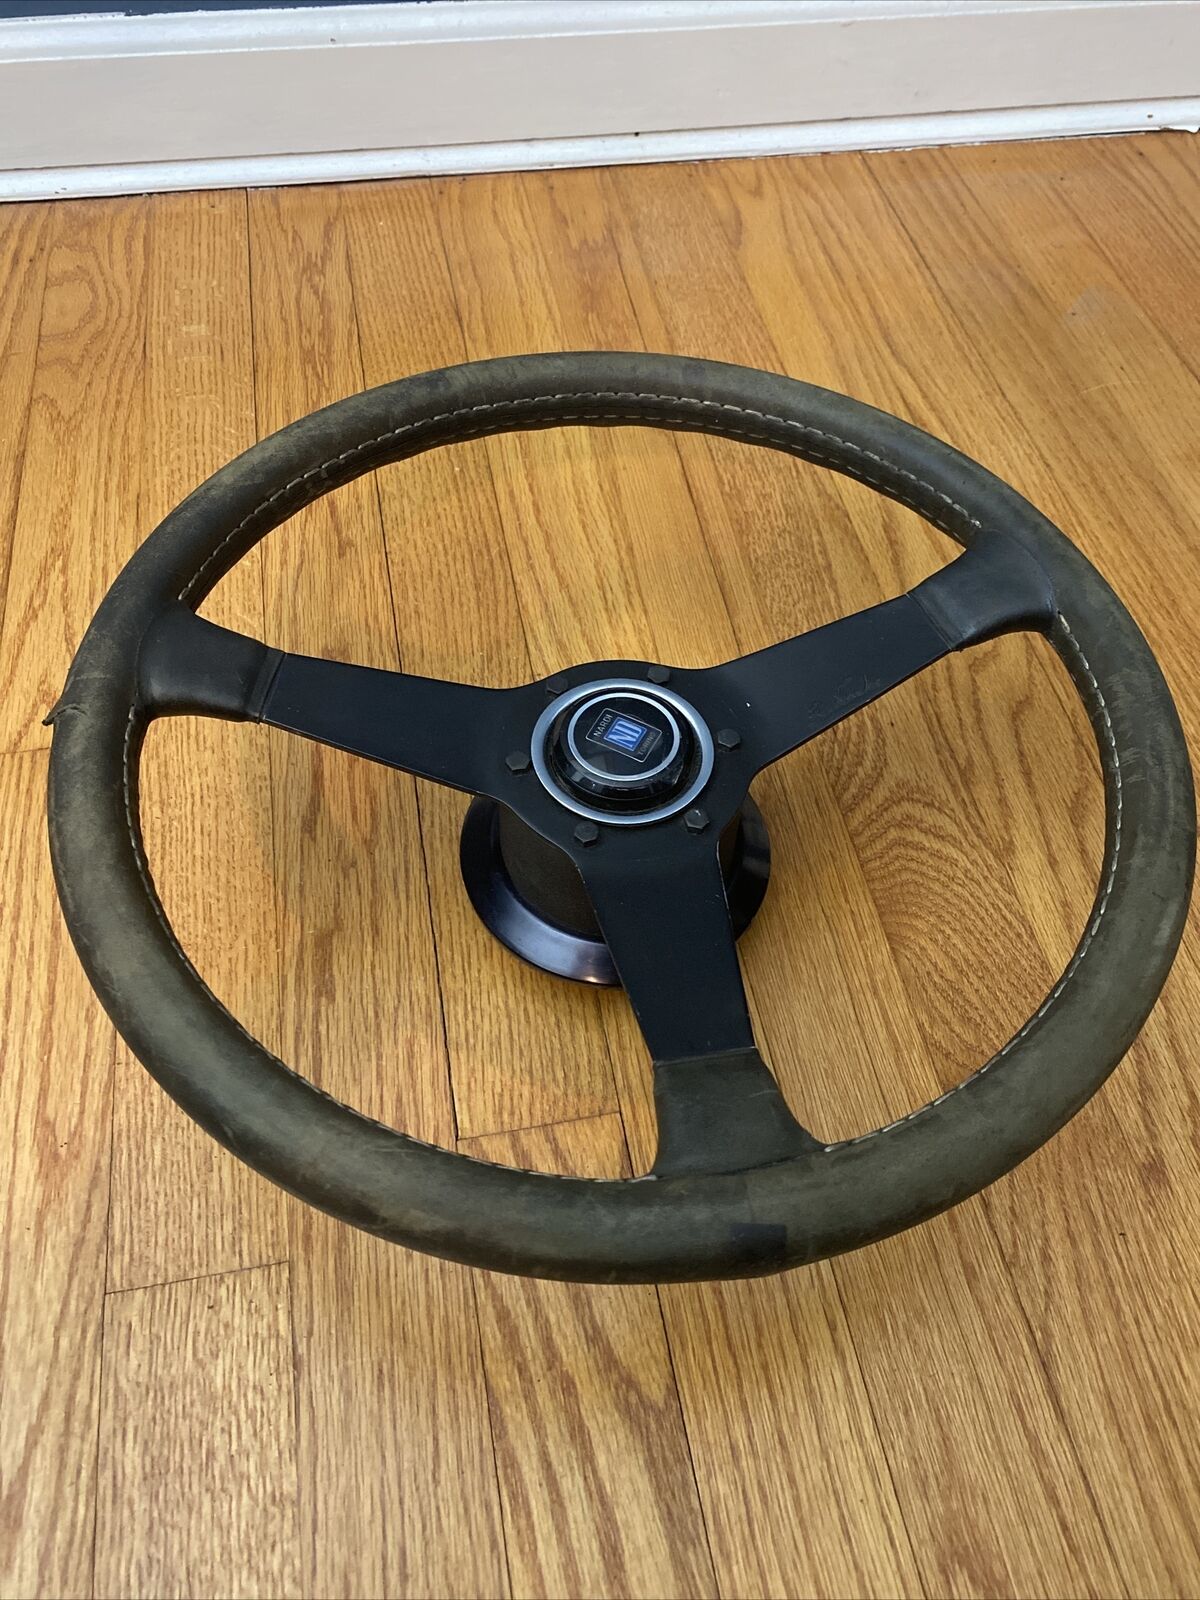 Vintage Nardi Torino Leather Steering Wheel With Horn Button And Hub